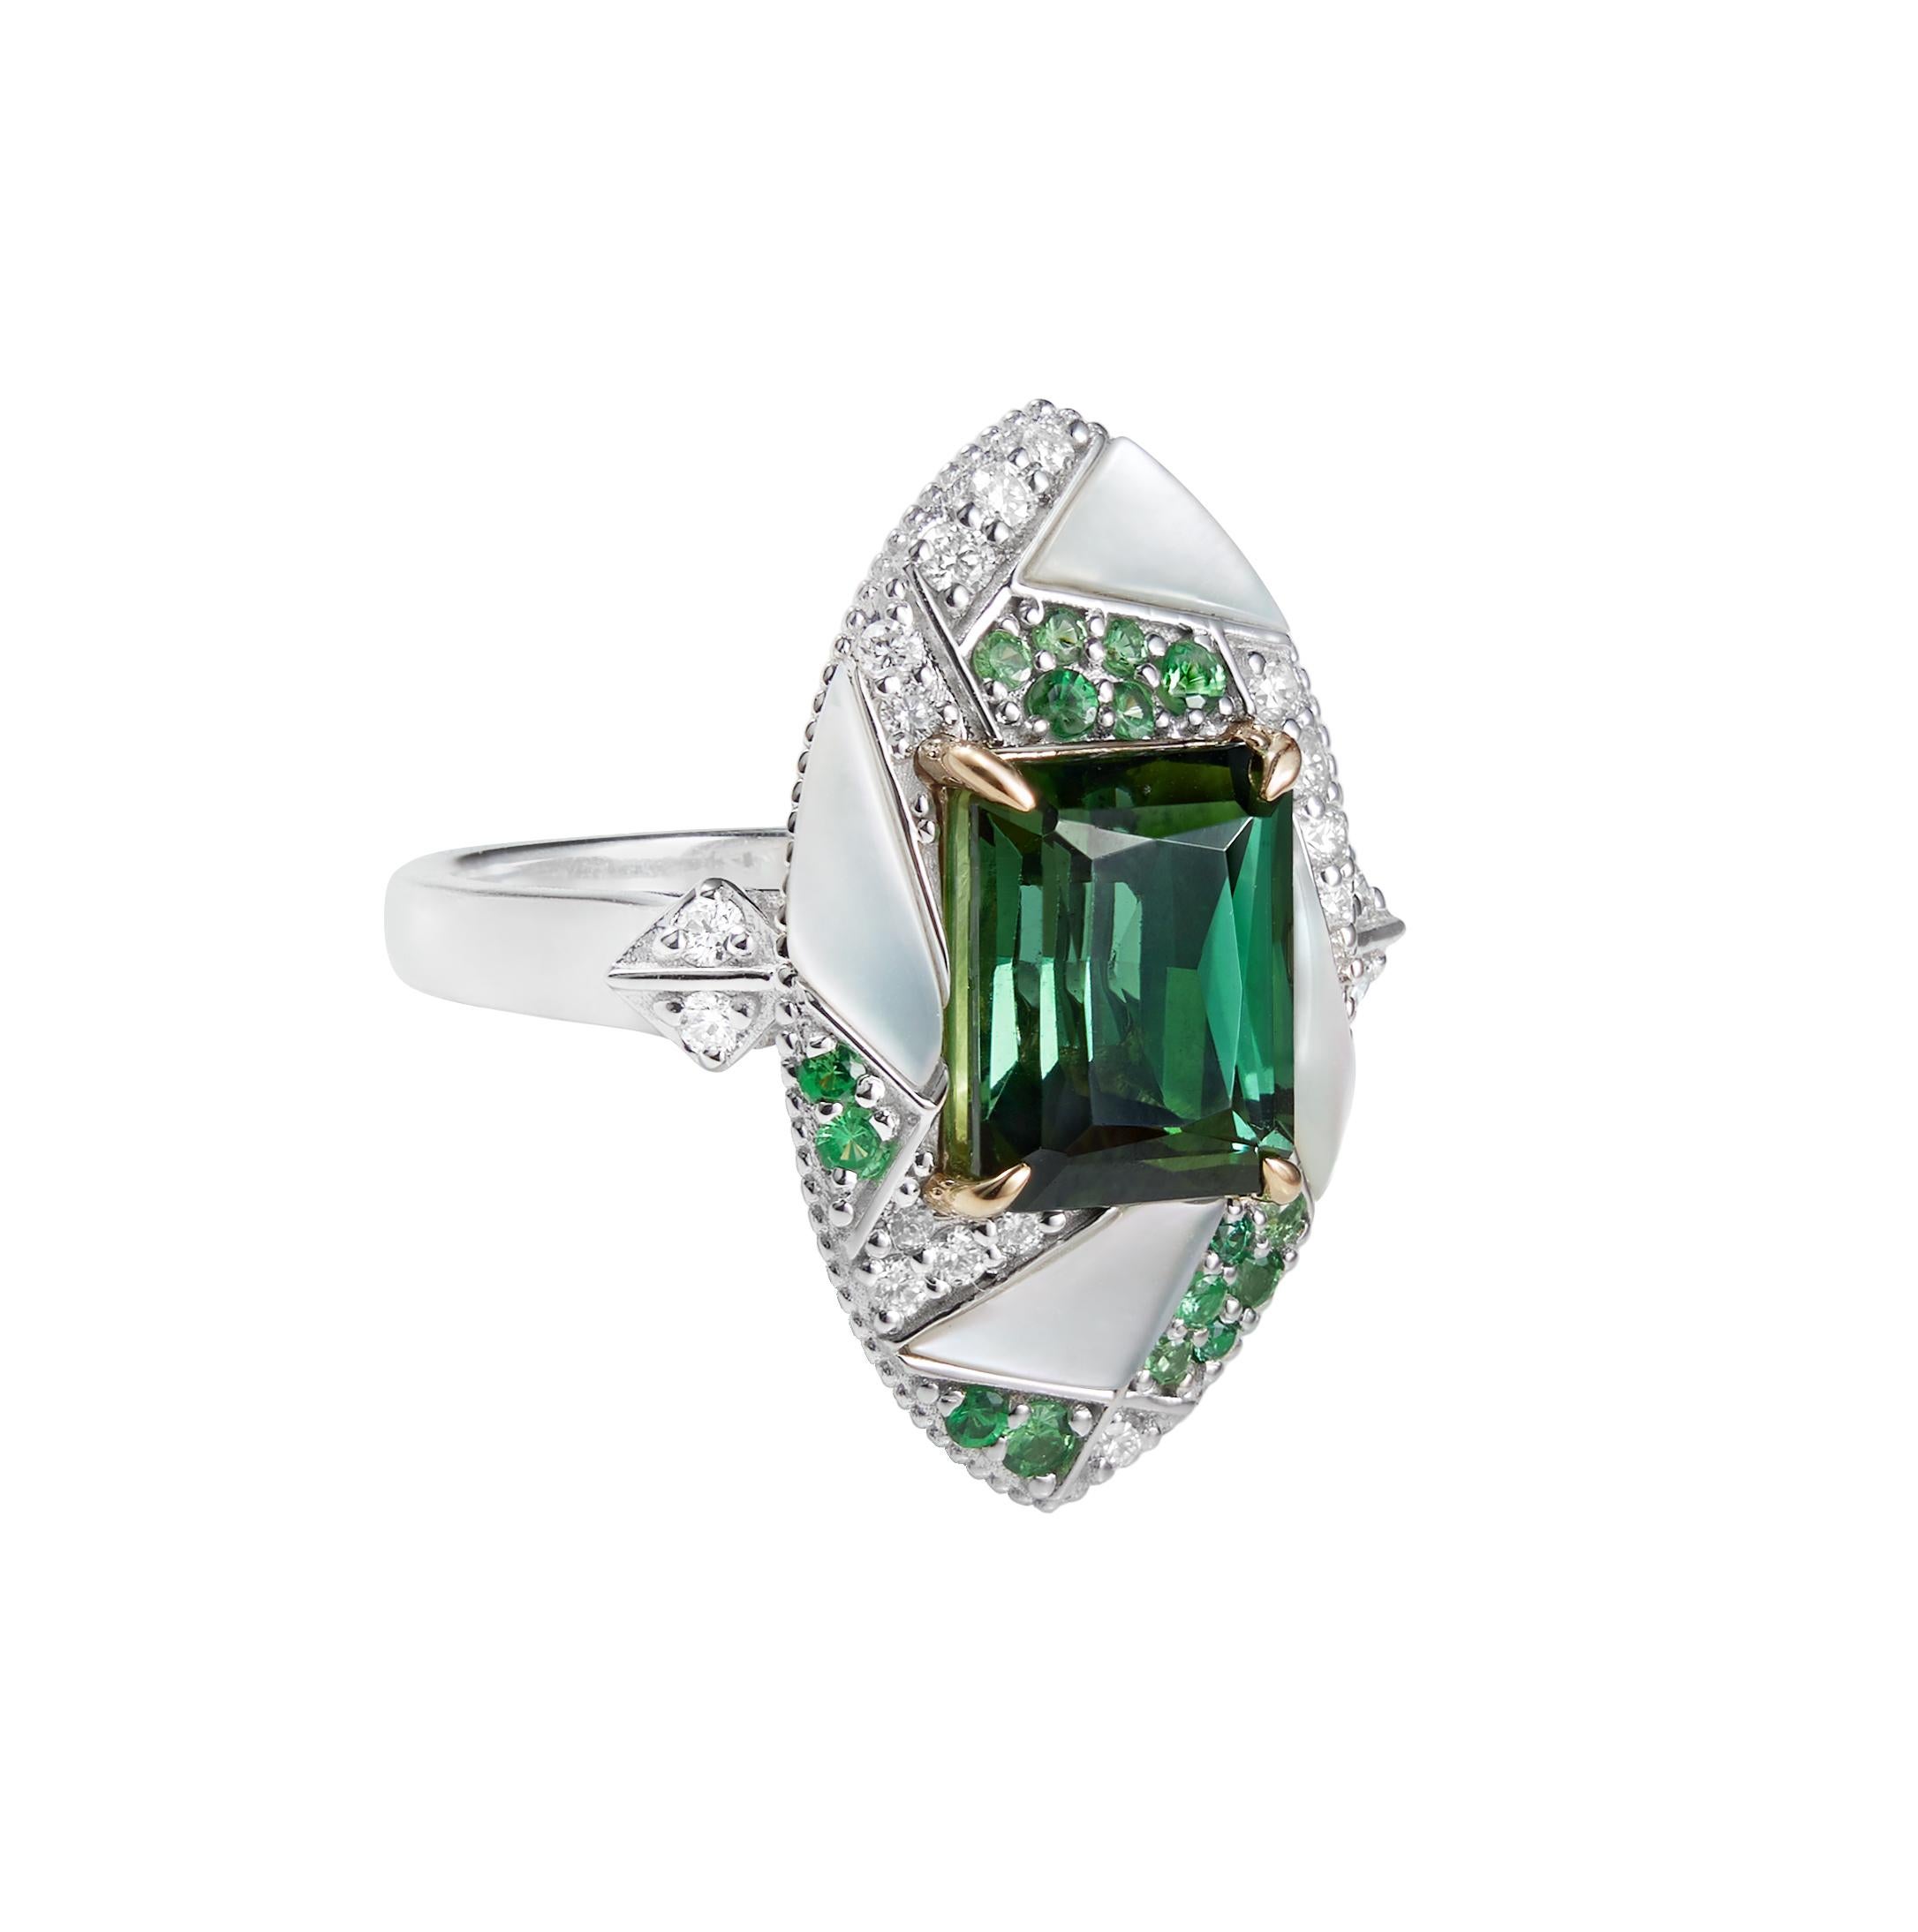 Mystic Green Tourmalines centered on an irregular frame of Tsavorites, Mother of Pearl and Diamonds. Combined with subtle gold detailing the tourmalines are hypnotising with its deep green hue.

Mystic Green Tourmaline Ring with Tsavorites, Mother